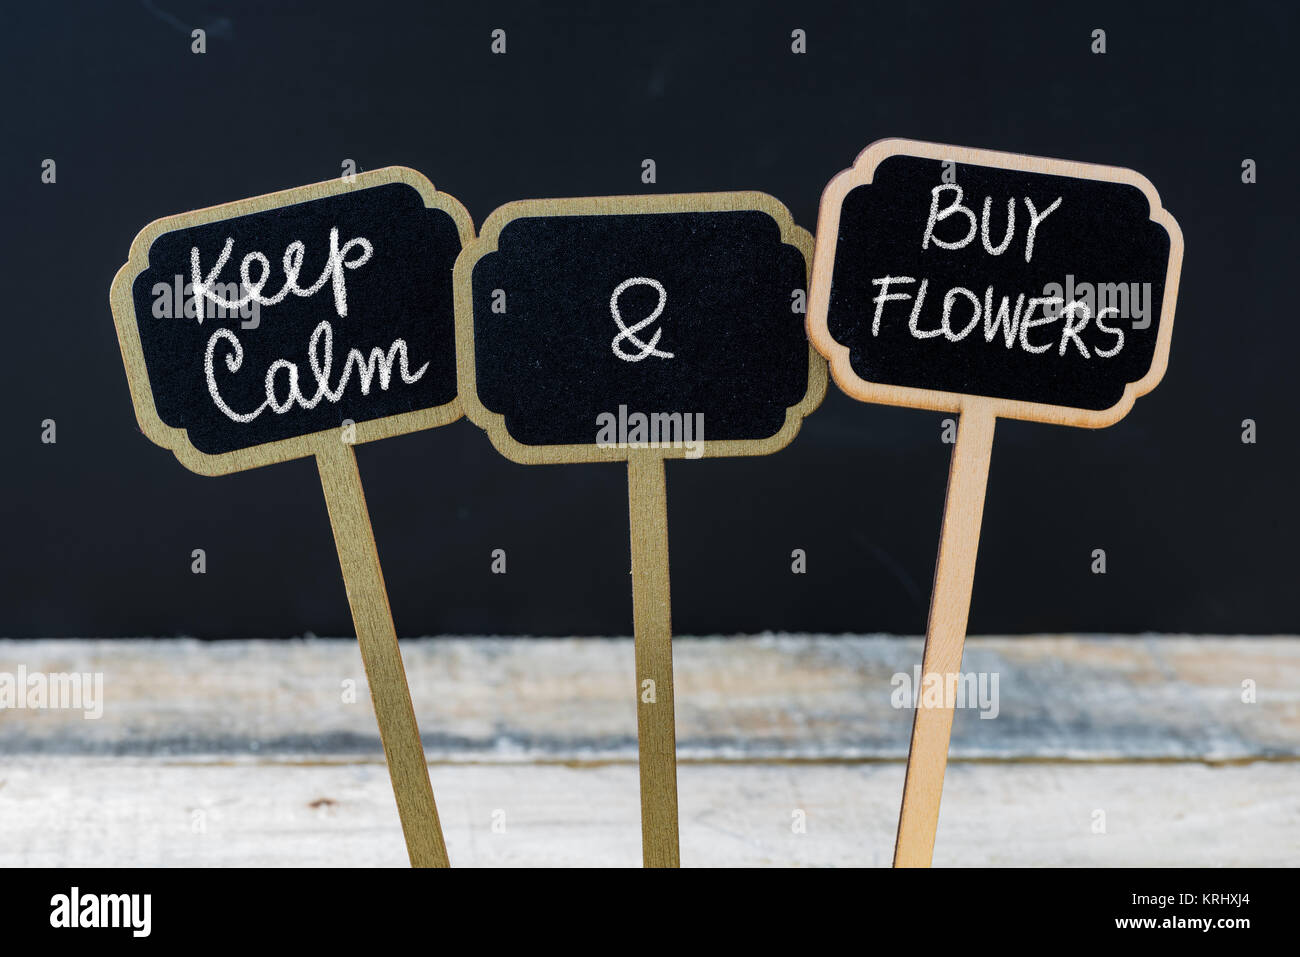 Keep Calm and Buy Flowers message written with chalk on mini blackboard labels Stock Photo